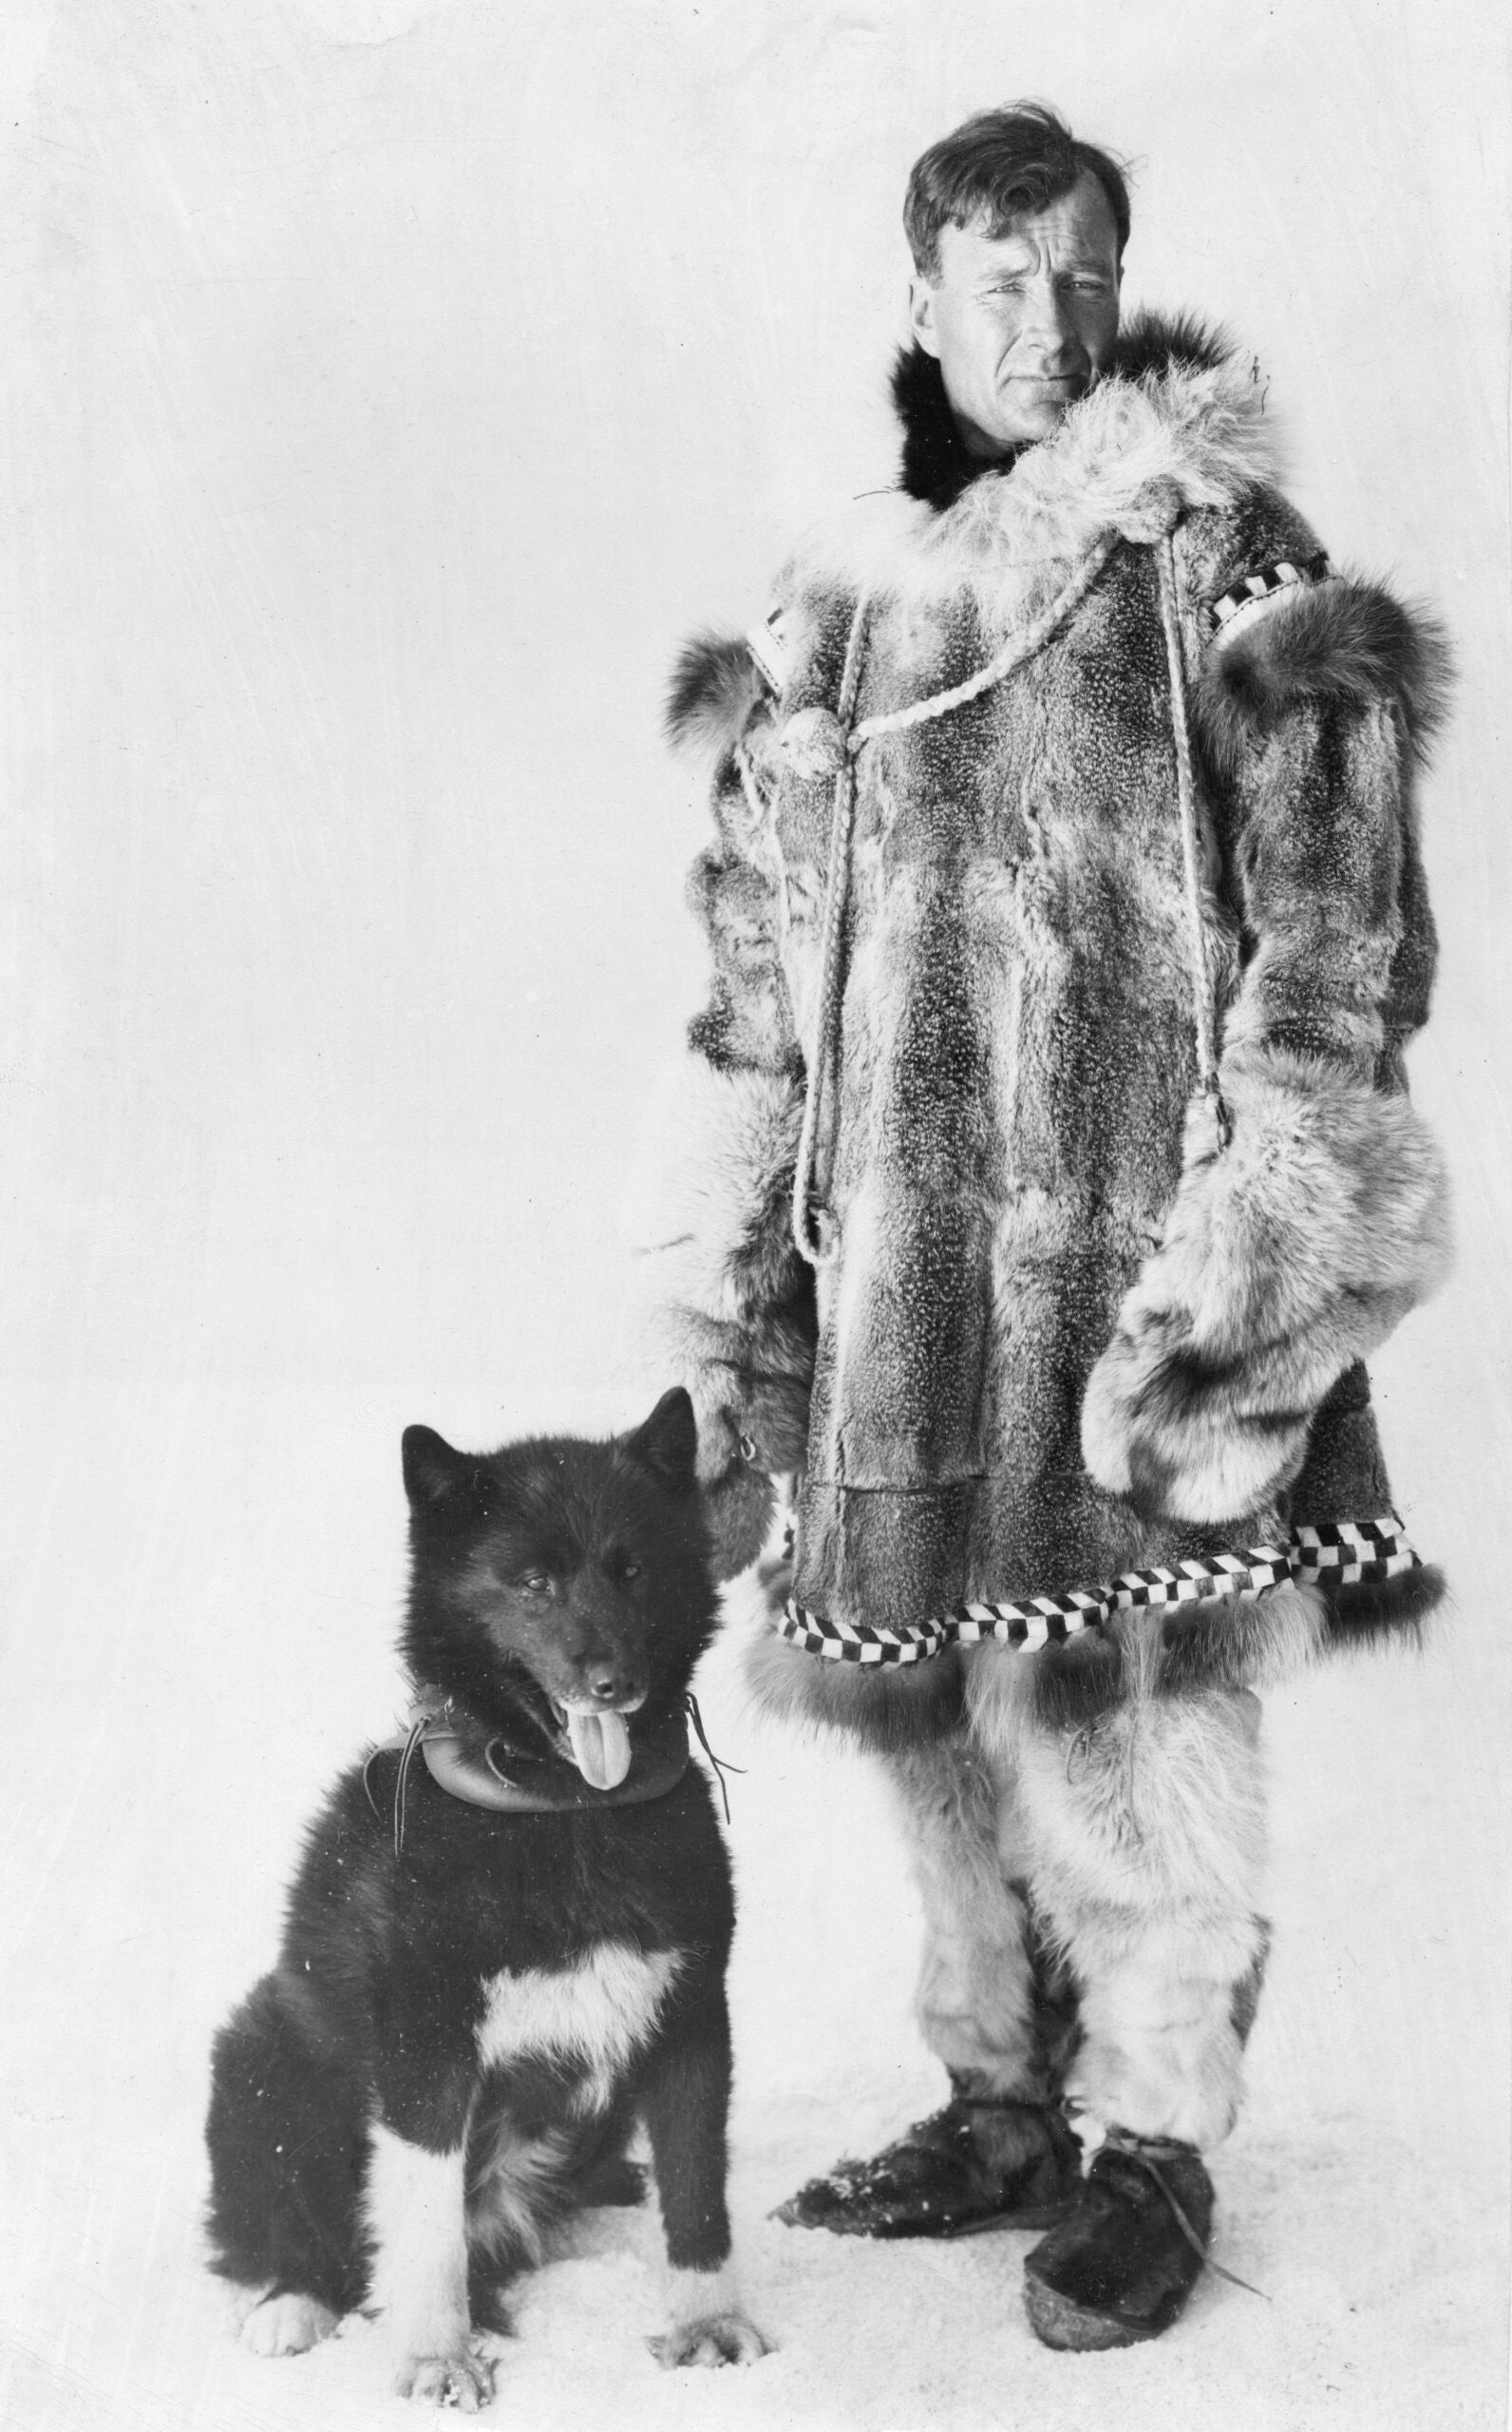 An archival photograph of famed sled dog Balto standing in the snow with his owner Gunnar Kasson.